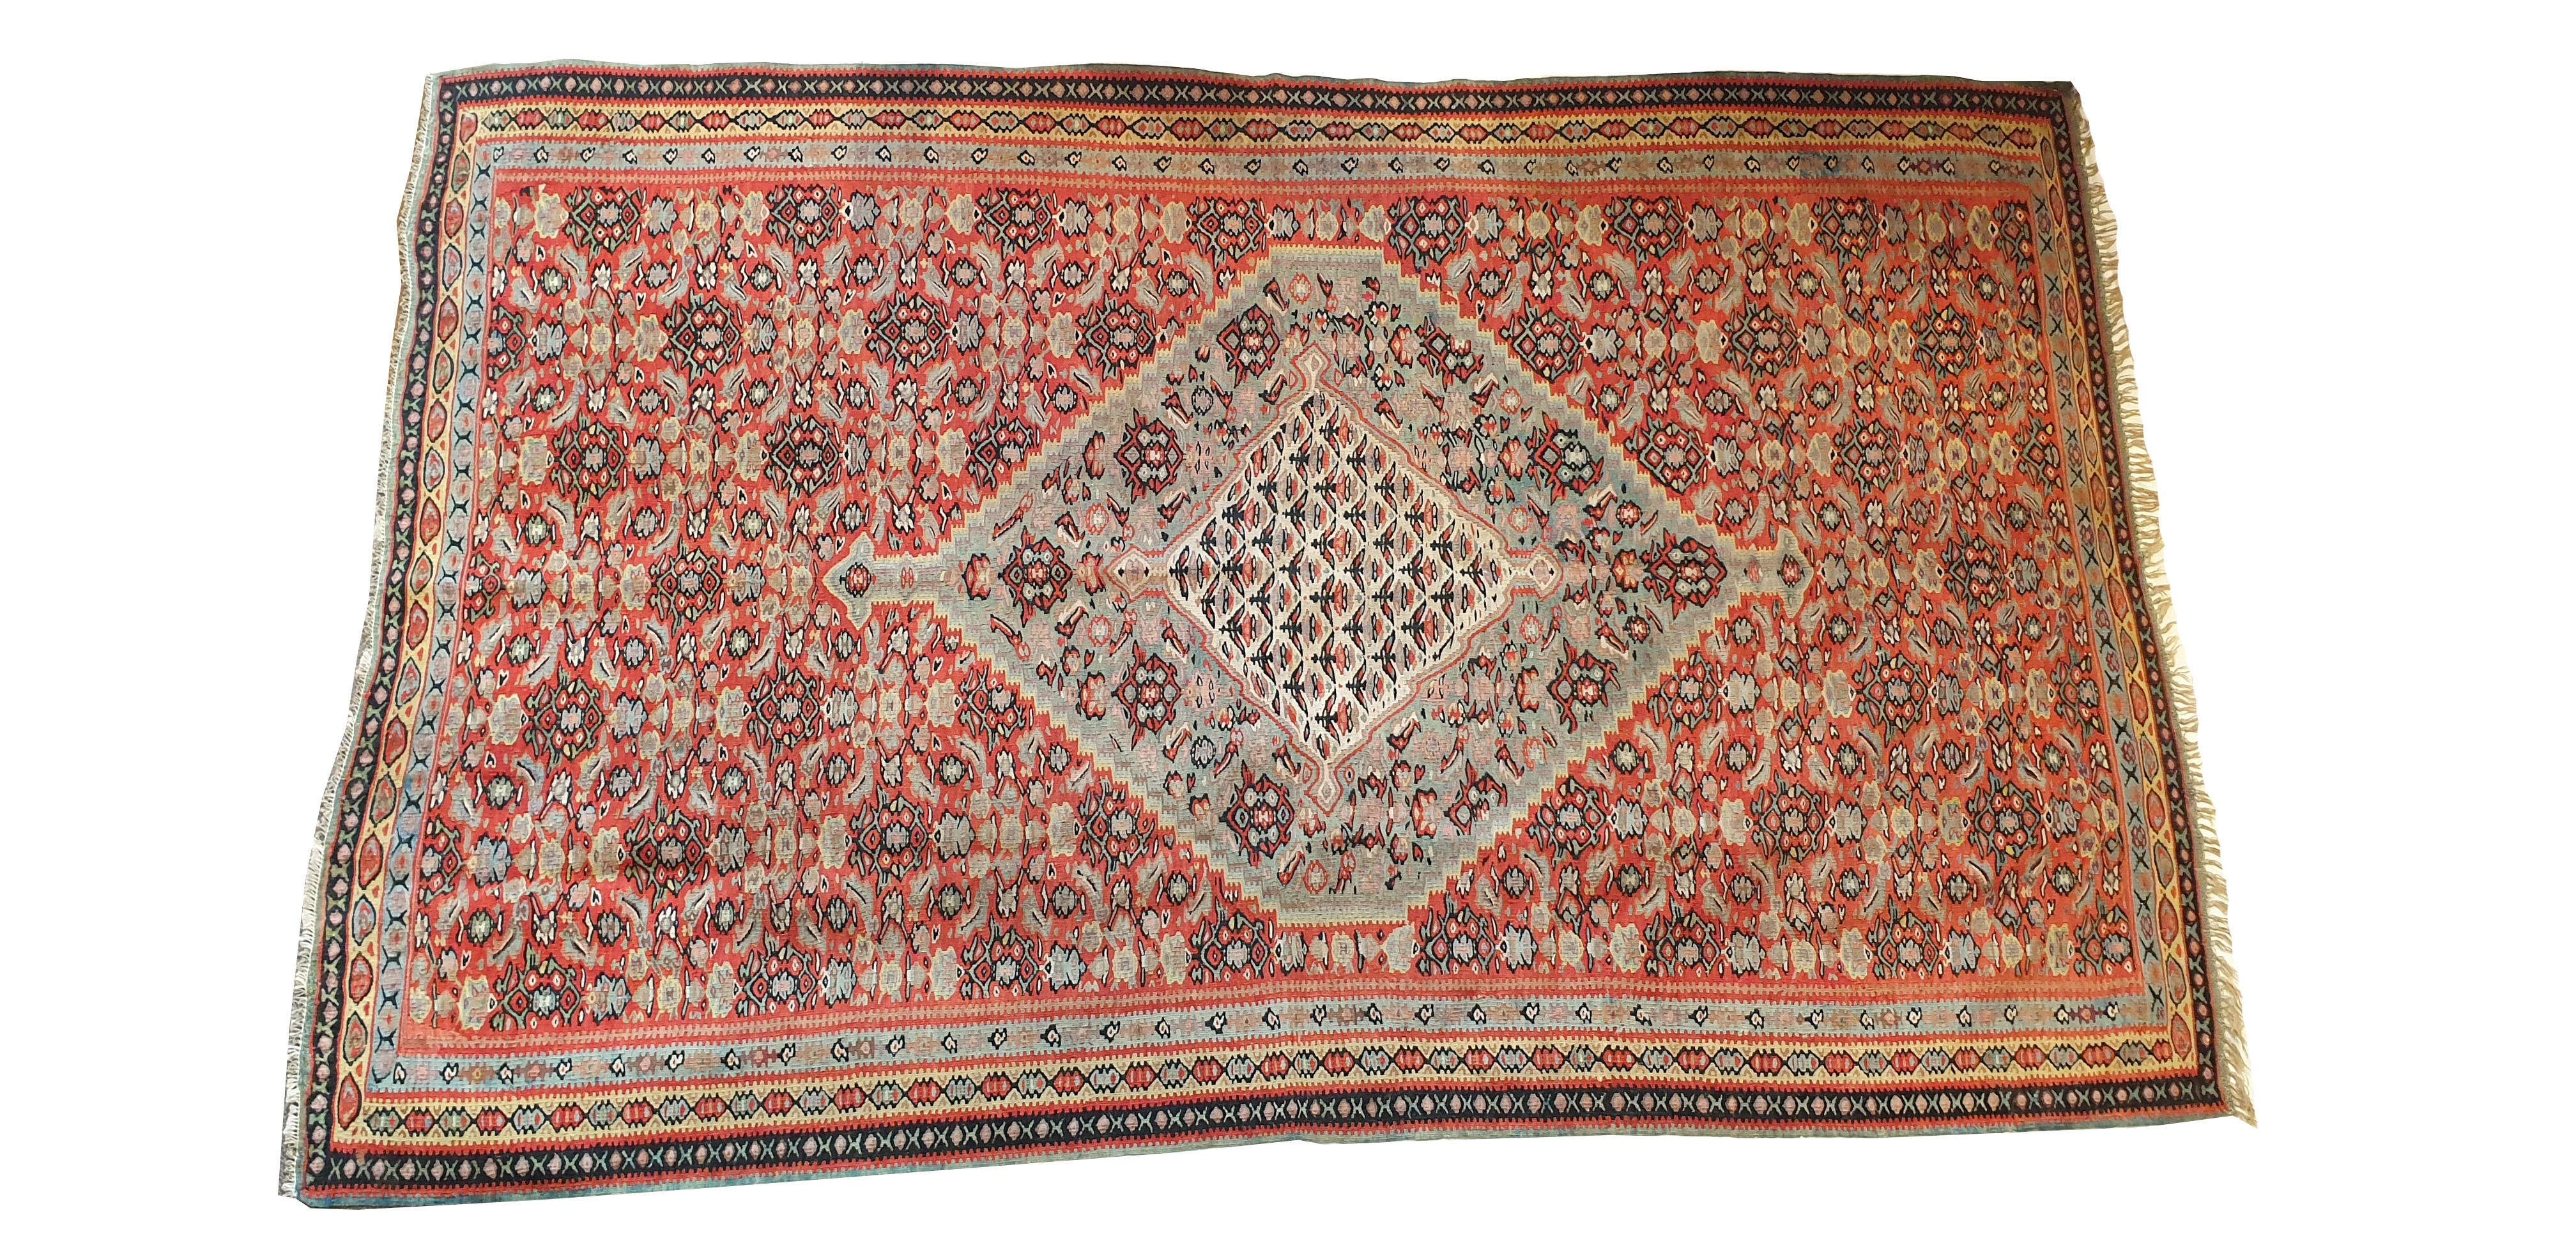 661 - Nice 19th century Kilim Senneh with beautiful fine central medallion patterns and beautiful colors pink, orange, yellow, green and dark brown, entirely handwoven with wool woven on cotton foundation.